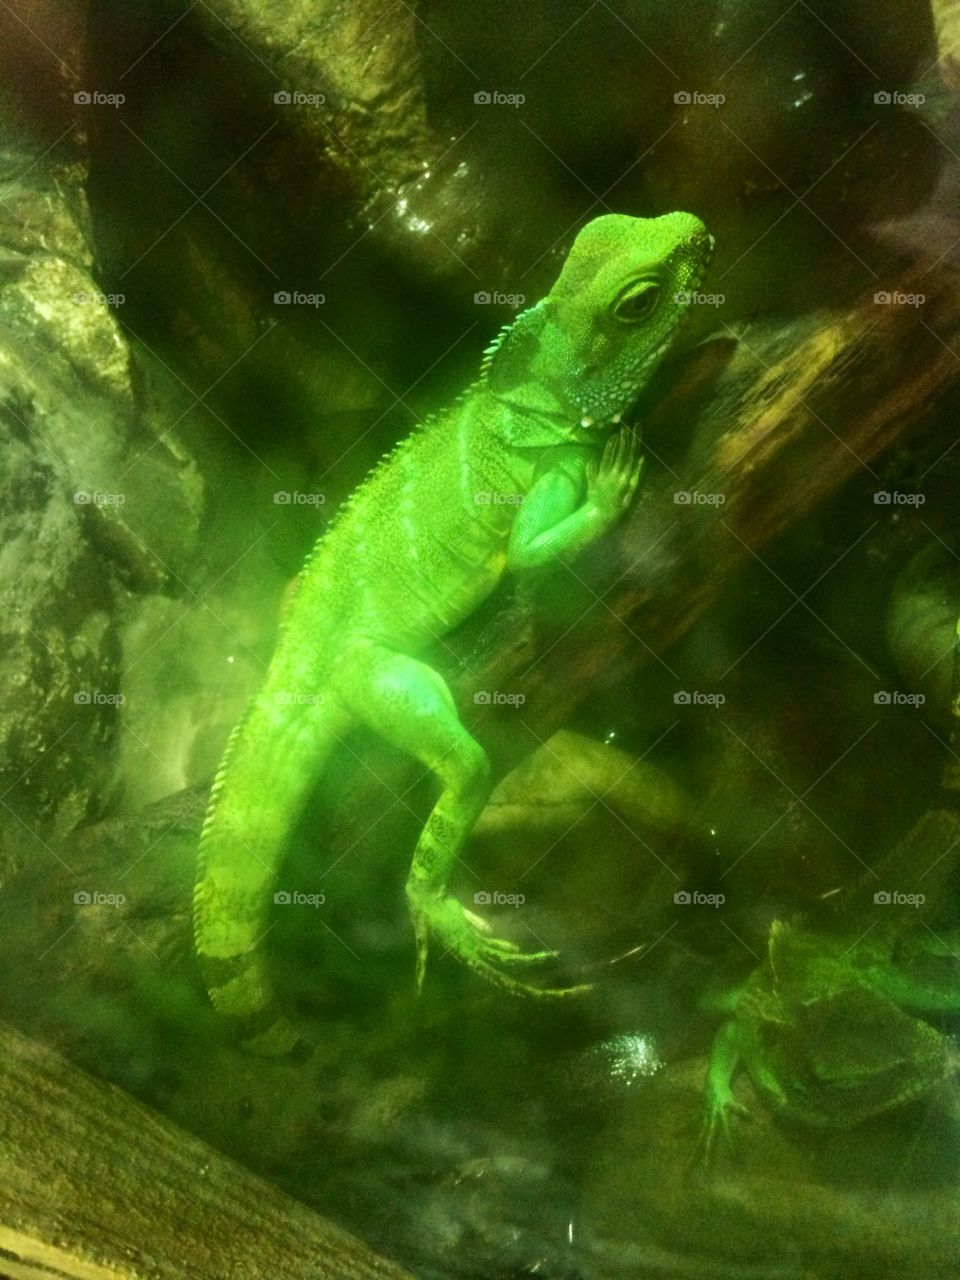 Green Misty Lizard. The foggy glass this lizard was behind made for a really neat picture